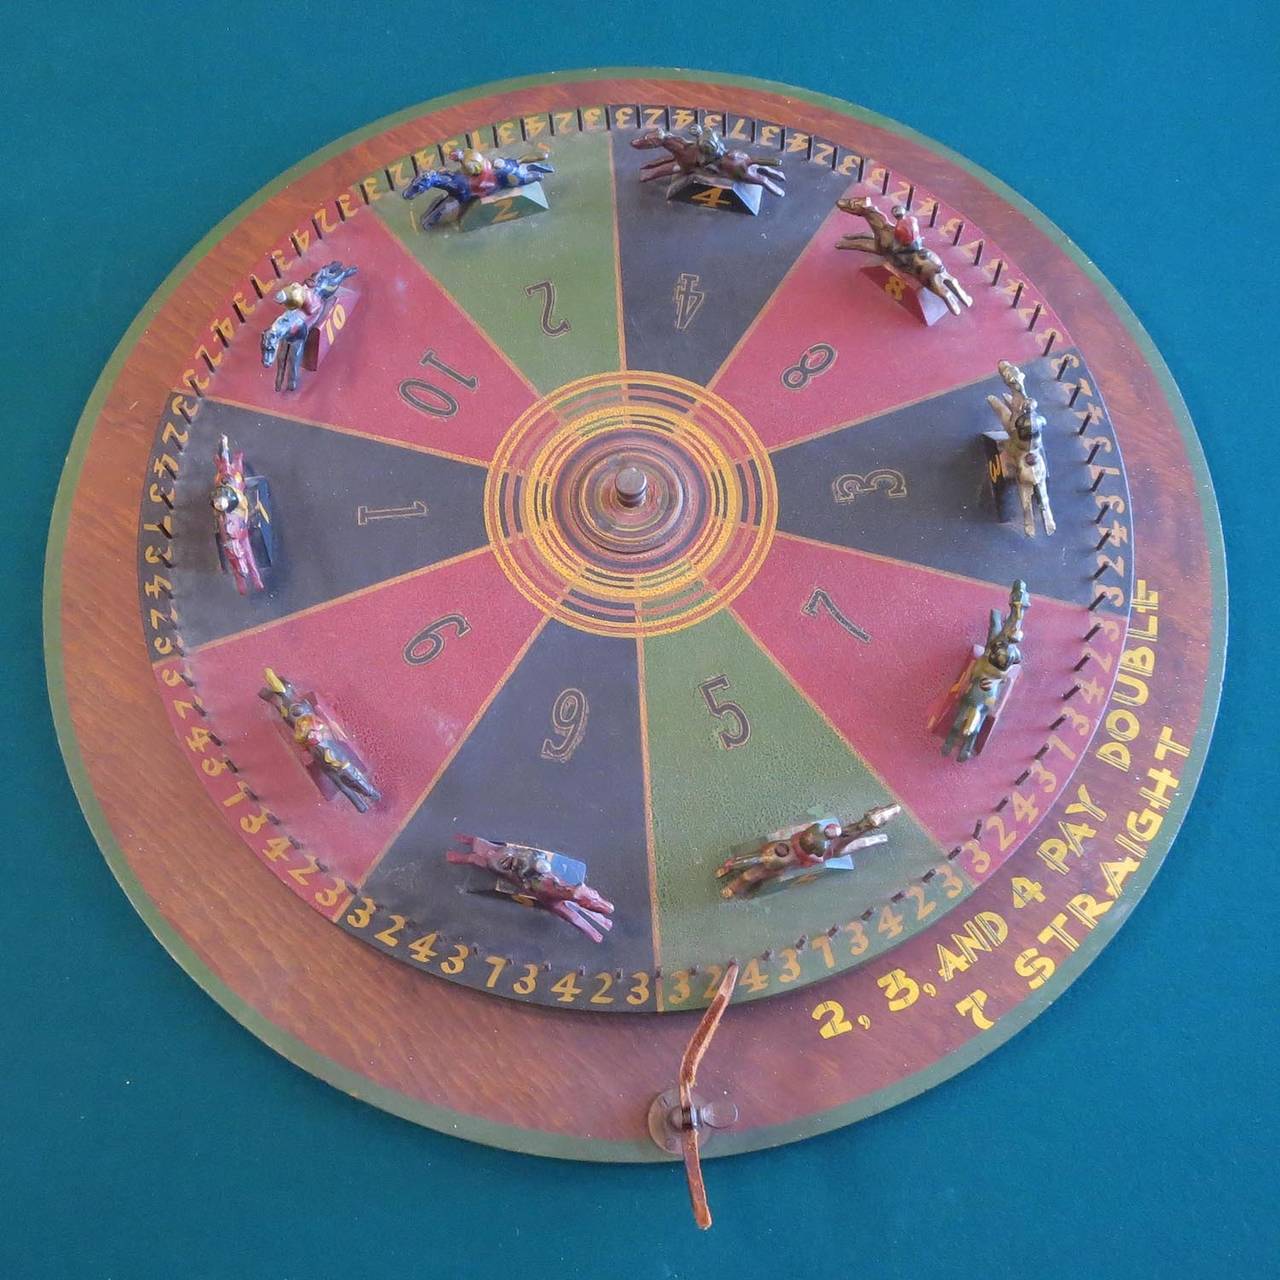 This charming horse racing game was often used on sea cruise ships, as they were portable and easy to set up once in legal gambling waters. The wheel spins very freely, and lands on one of the numbered horses to win. Numbers, 2, 3 and 4 pay double.